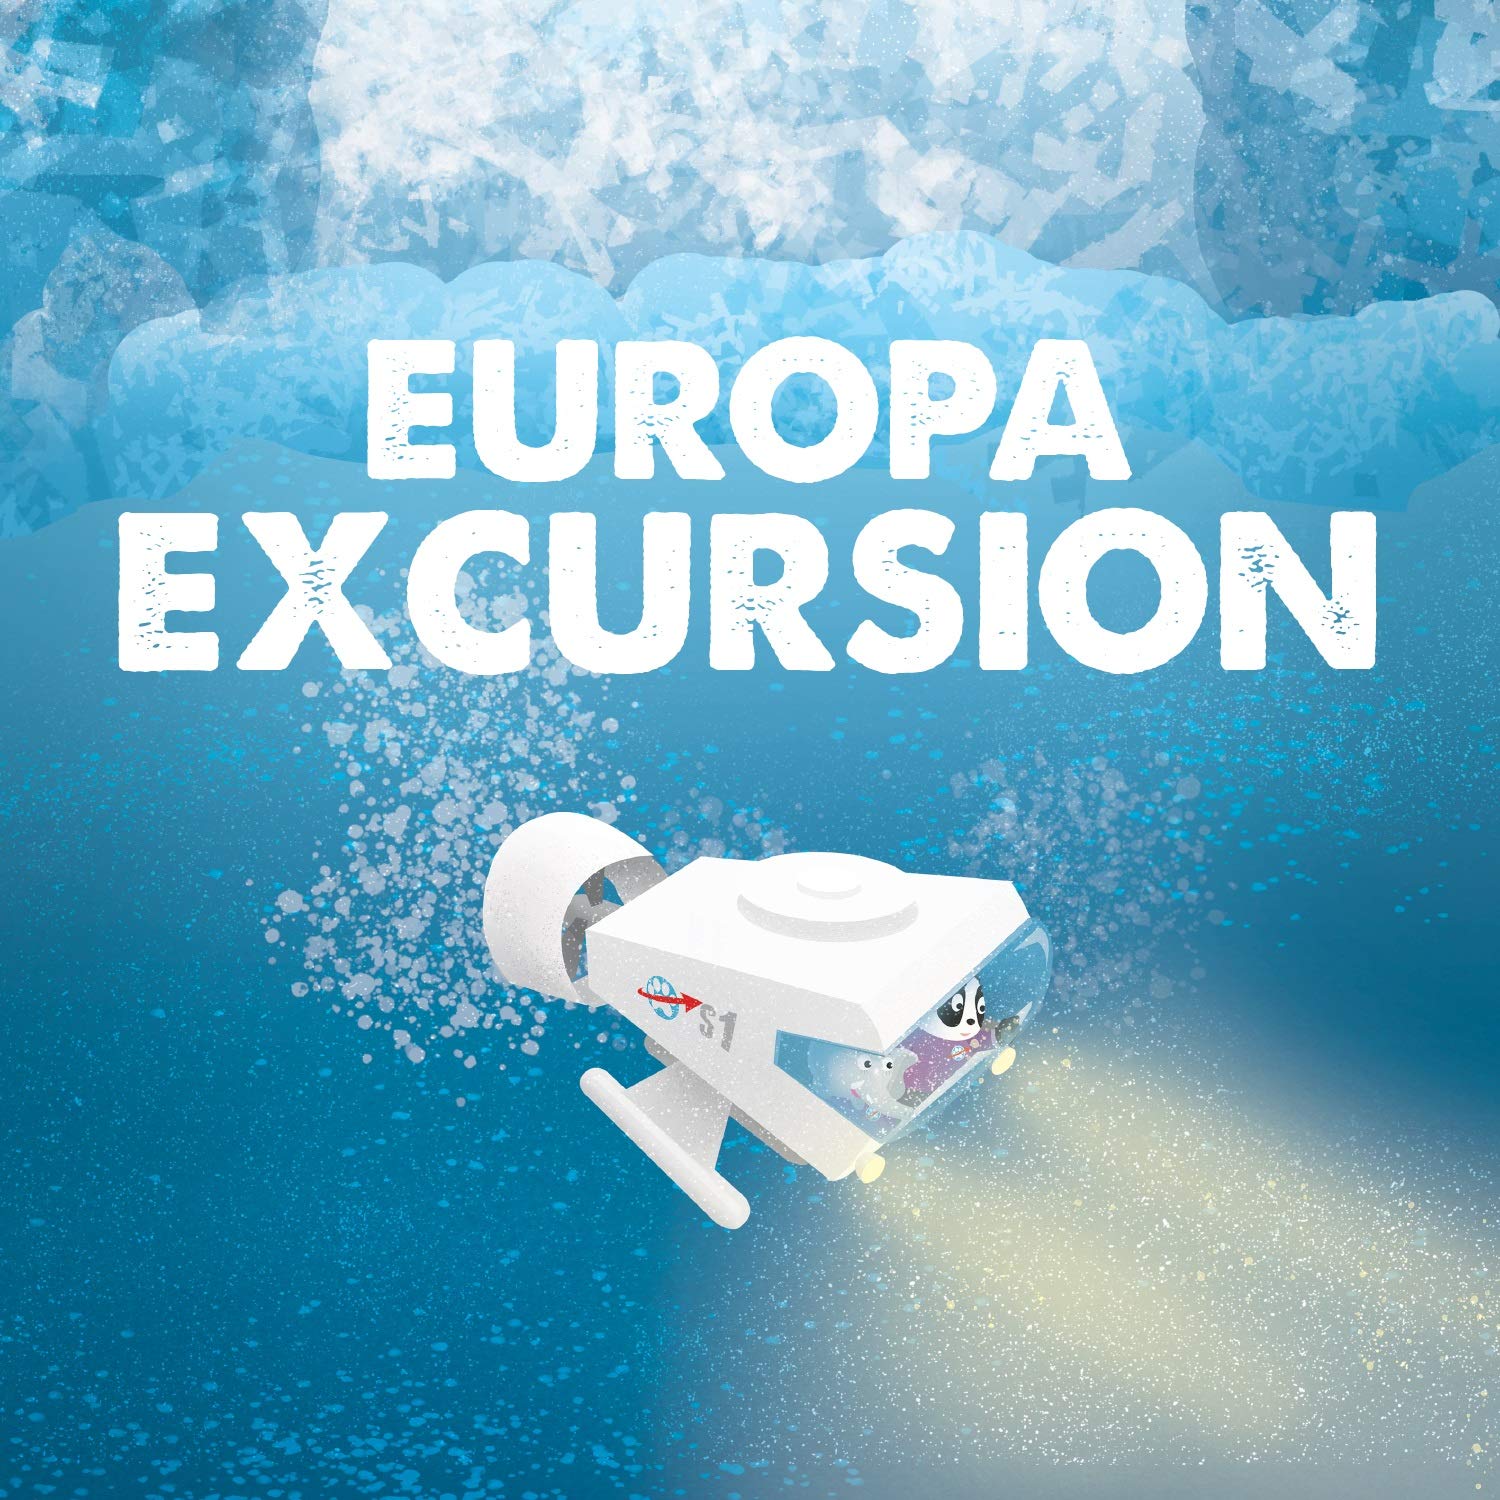 Epic Space Adventure: Europa Excursion by Andrew Rader